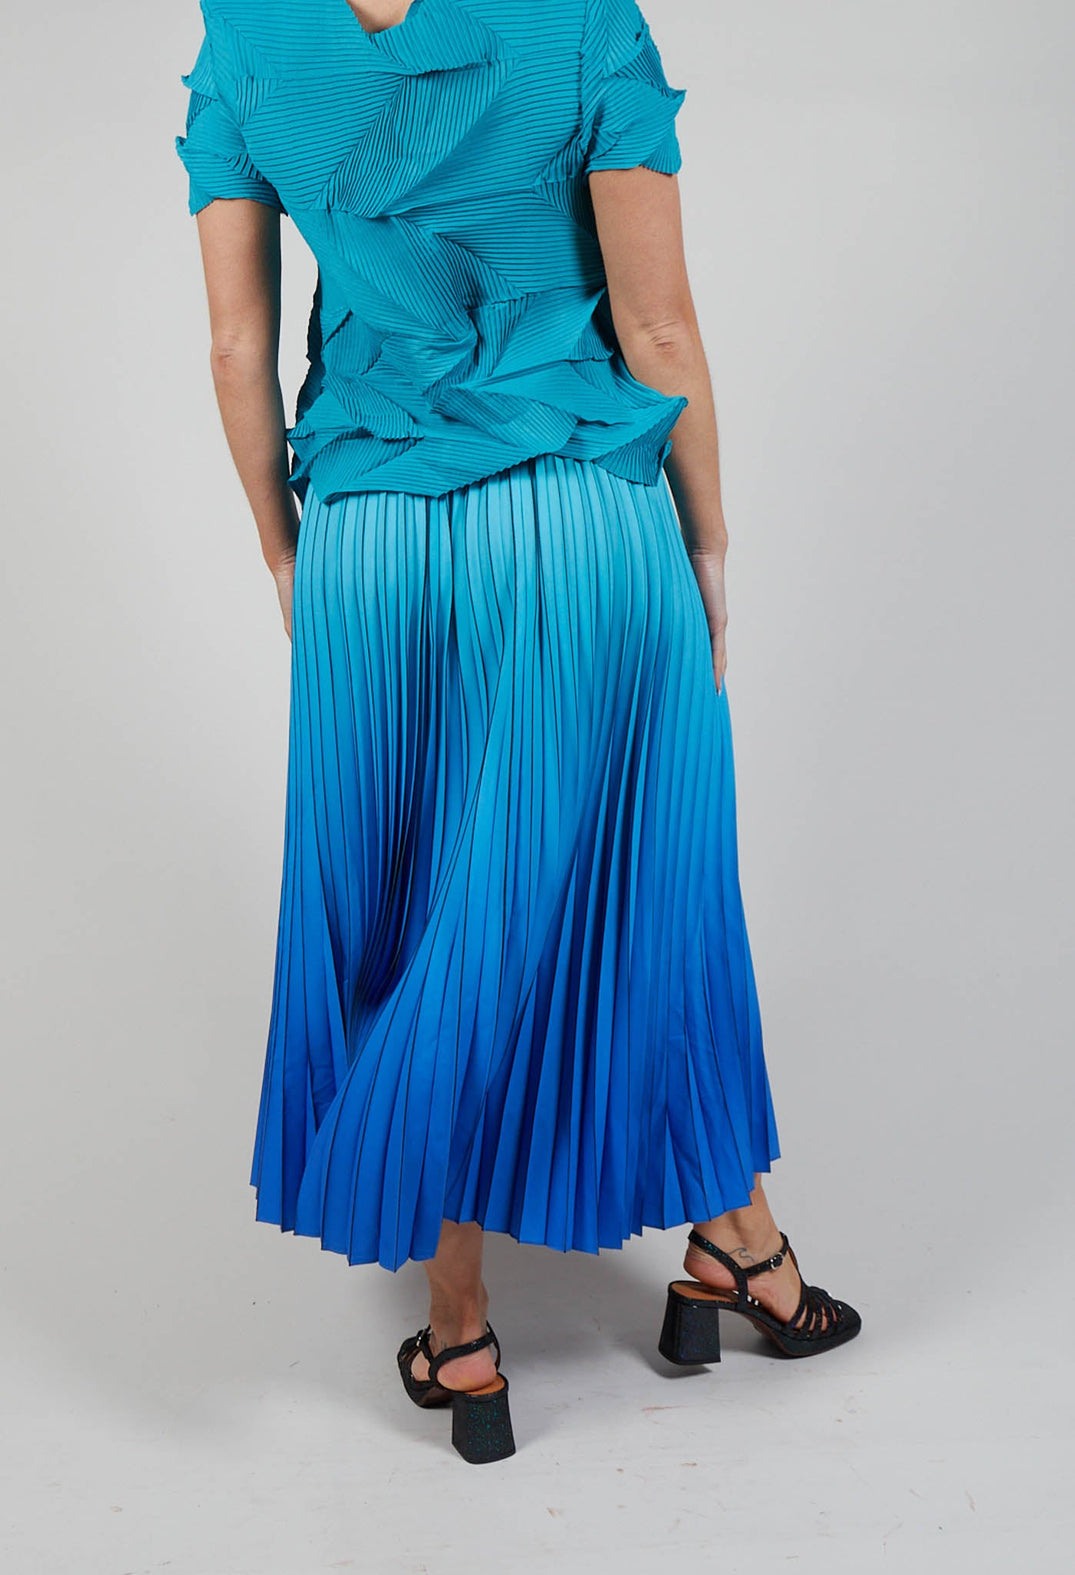 Boxy Skirt in Blue Bird and Dazzling Blue